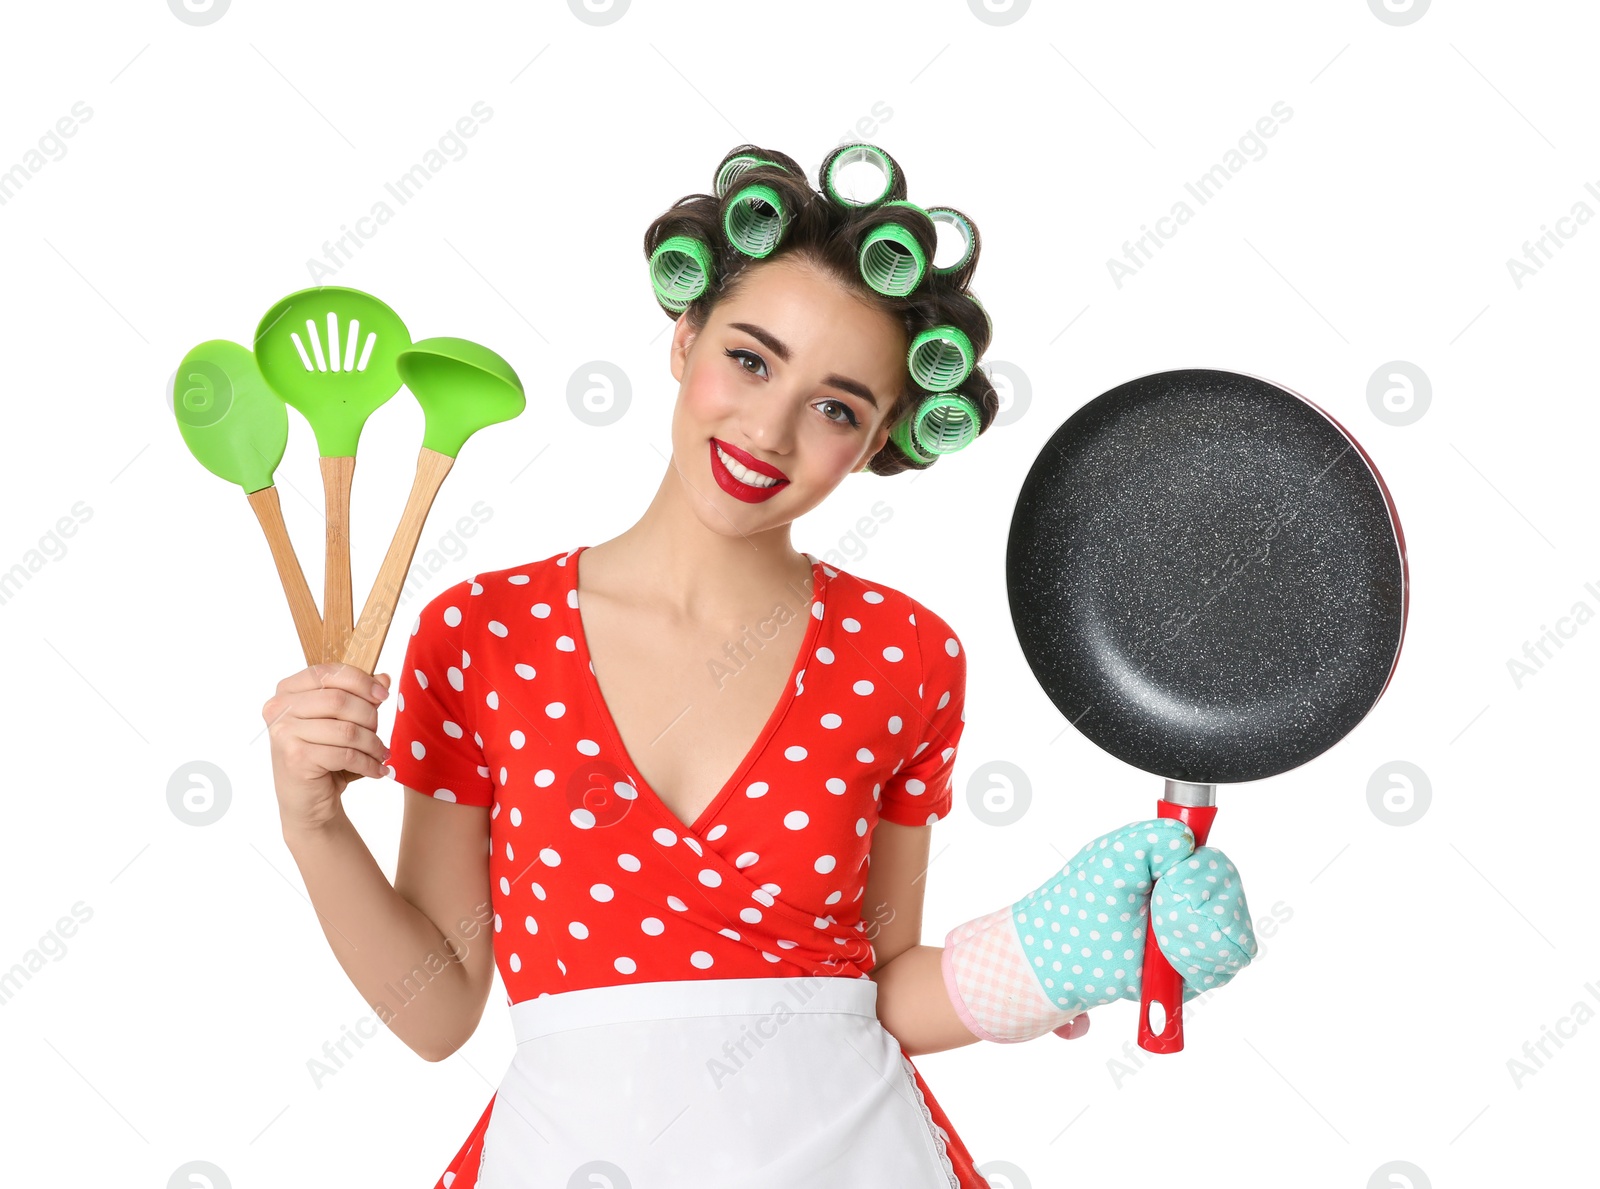 Photo of Funny young housewife with frying pan and cooking utensils on white background